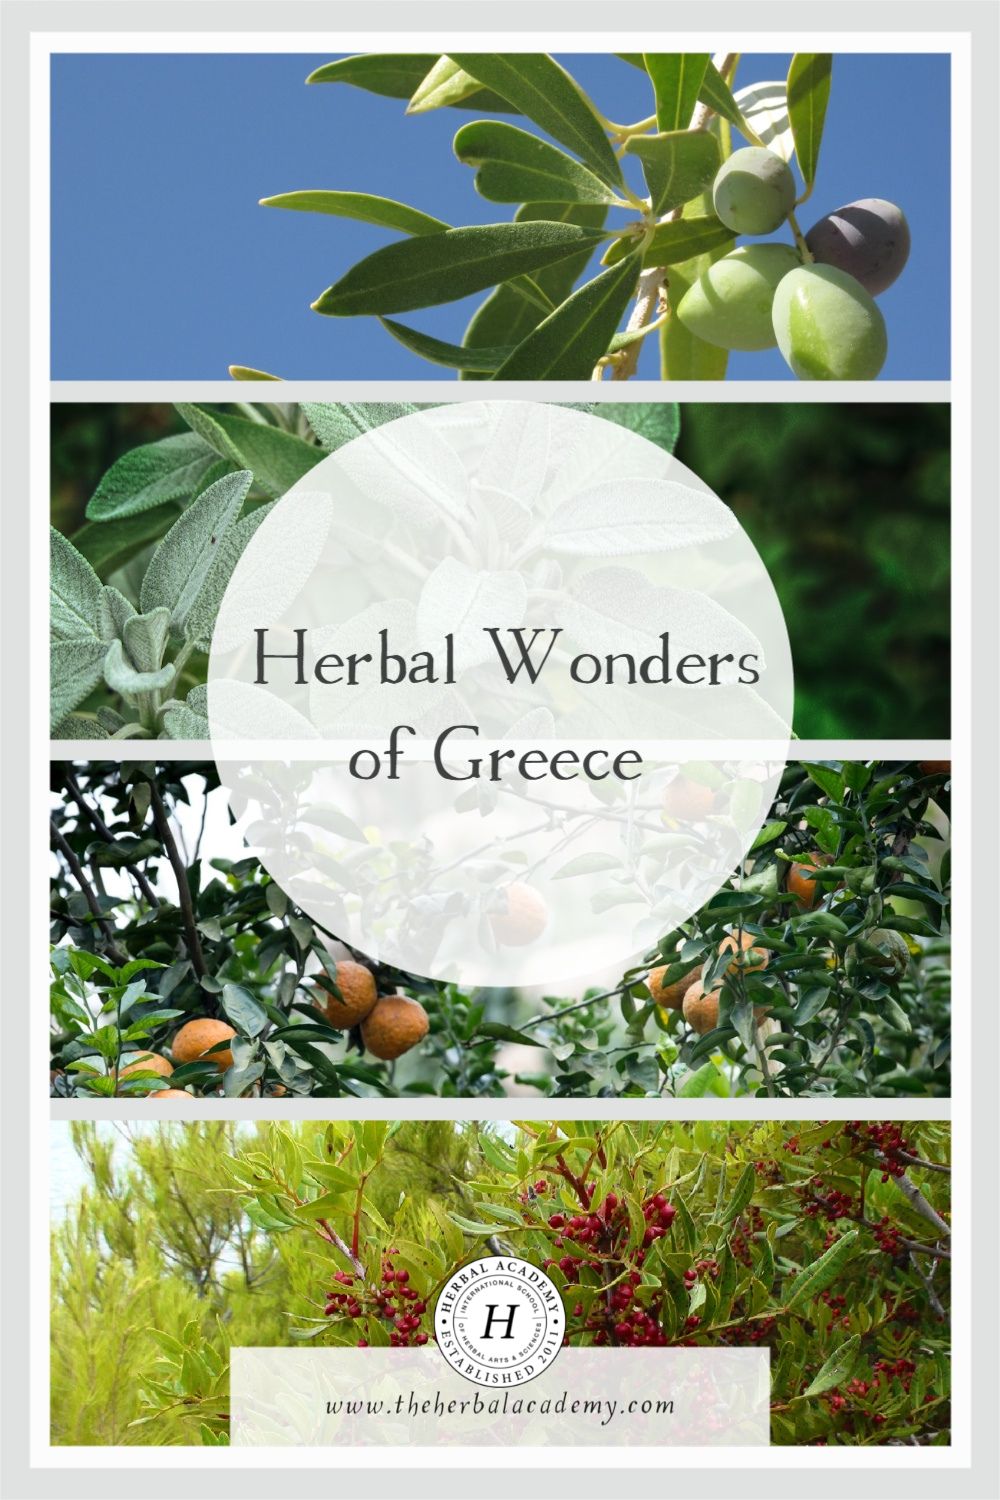 Herbal Wonders of Greece | Herbal Academy | In addition to its promise of fun in the sun, the herbal wonders of Greece also provide a haven for a diversity of flora and fauna.